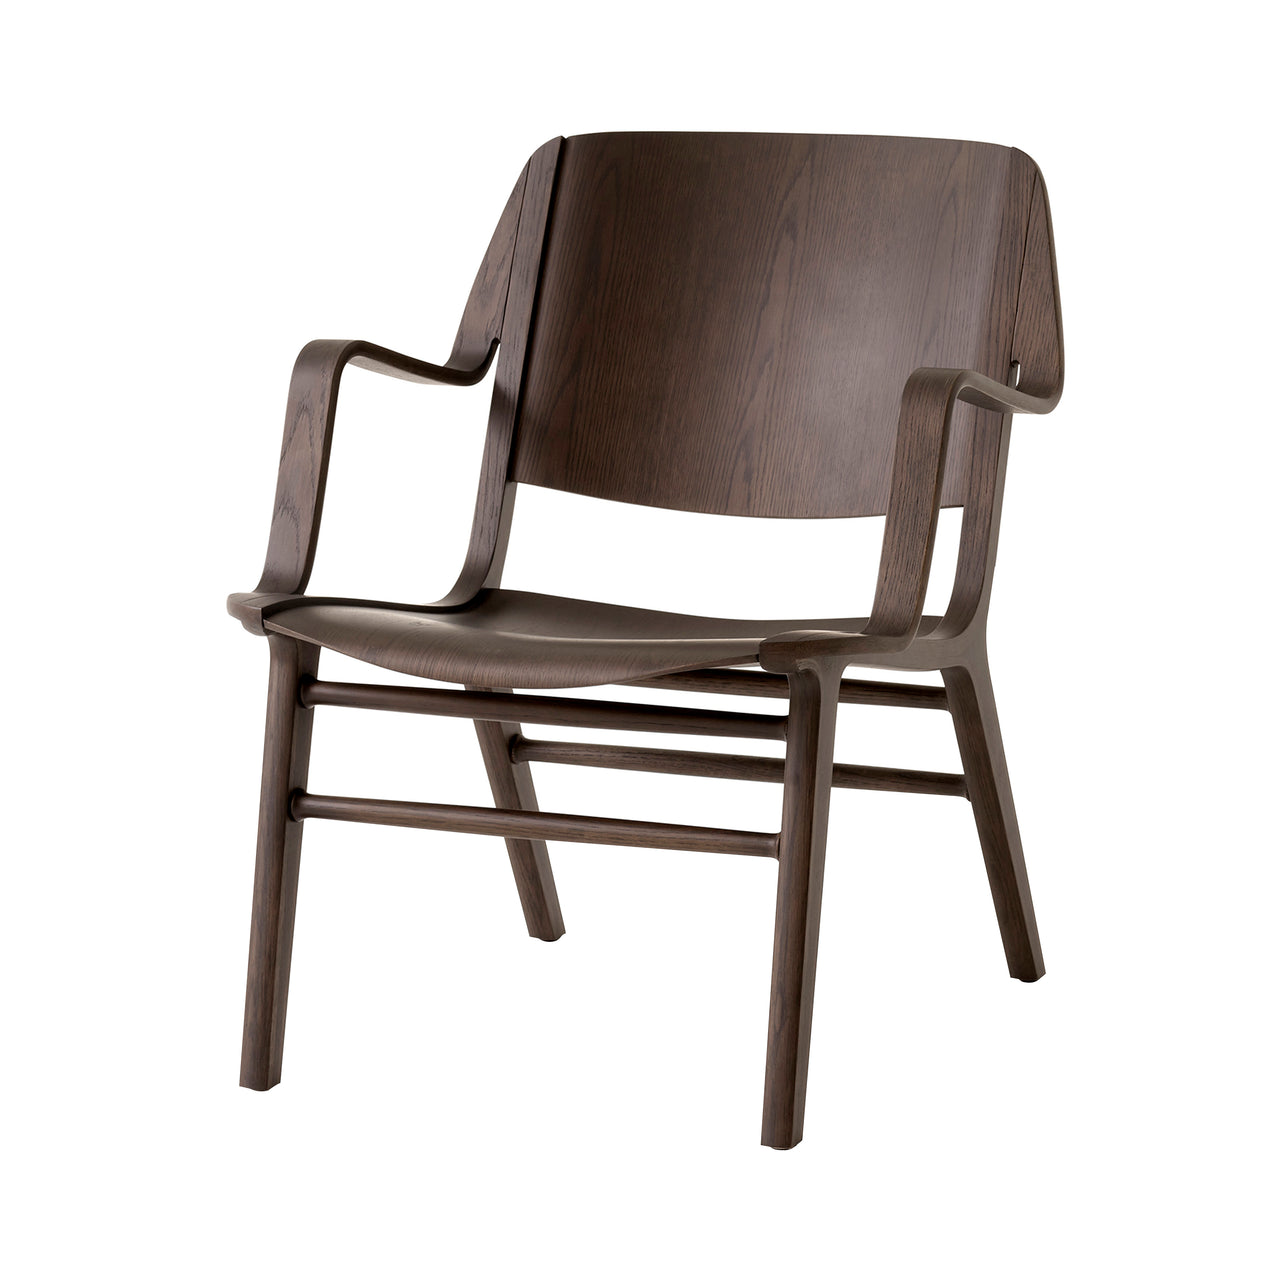 AX Lounge Chair HM11: Dark Stained Oak